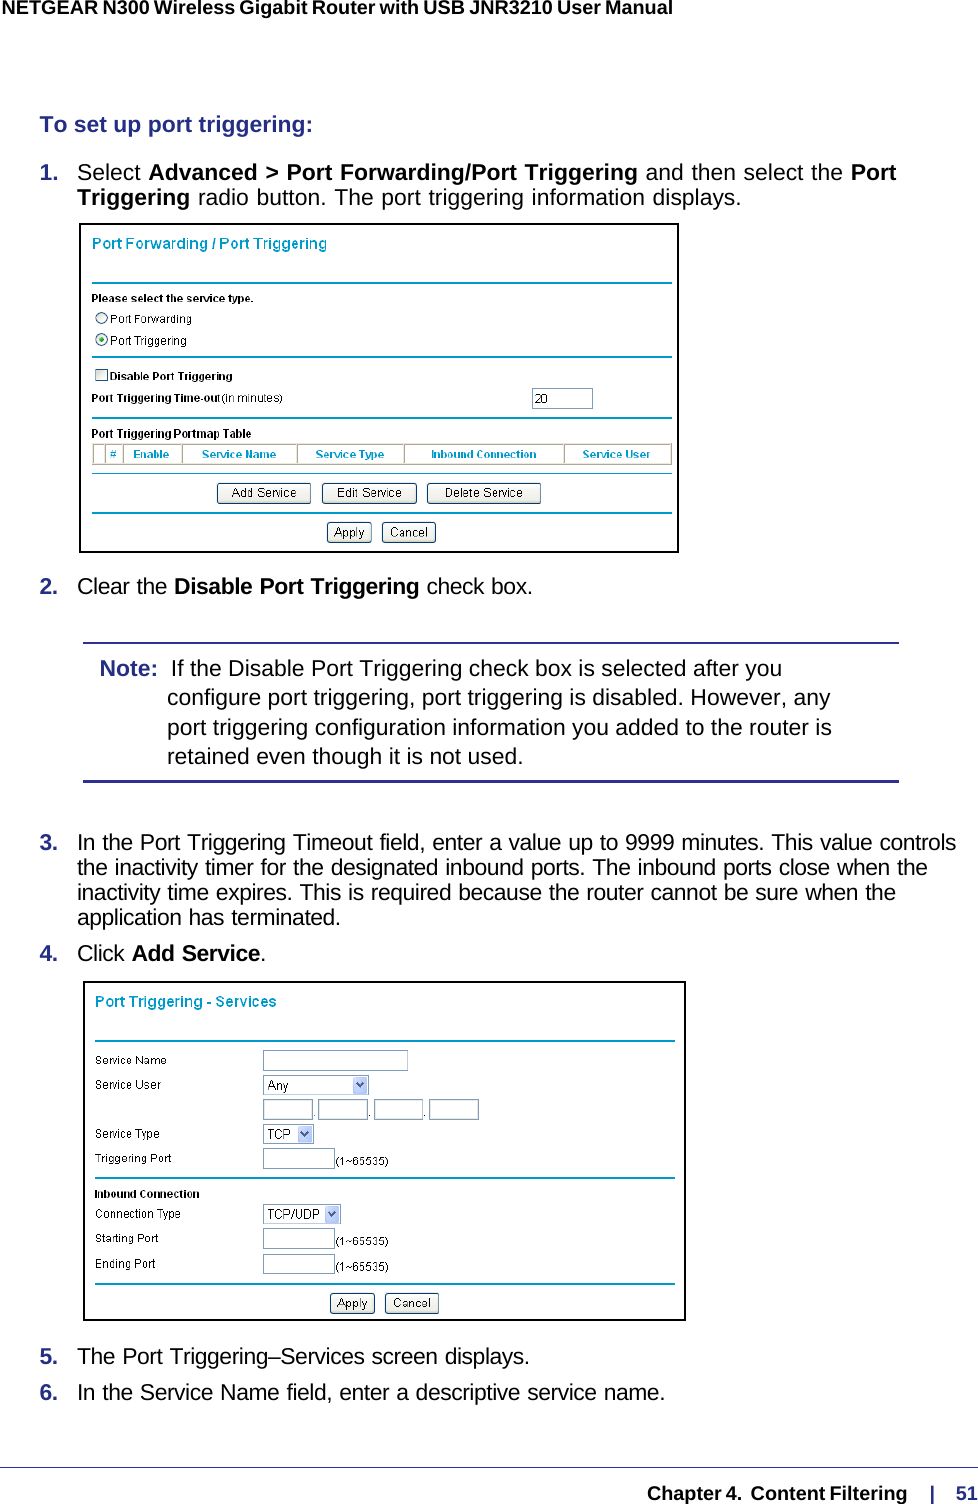   Chapter 4.  Content Filtering     |    51NETGEAR N300 Wireless Gigabit Router with USB JNR3210 User Manual To set up port triggering: 1.  Select Advanced &gt; Port Forwarding/Port Triggering and then select the Port Triggering radio button. The port triggering information displays.2.  Clear the Disable Port Triggering check box.Note:  If the Disable Port Triggering check box is selected after you configure port triggering, port triggering is disabled. However, any port triggering configuration information you added to the router is retained even though it is not used.3.  In the Port Triggering Timeout field, enter a value up to 9999 minutes. This value controls the inactivity timer for the designated inbound ports. The inbound ports close when the inactivity time expires. This is required because the router cannot be sure when the application has terminated.4.  Click Add Service. 5.  The Port Triggering–Services screen displays.6.  In the Service Name field, enter a descriptive service name. 